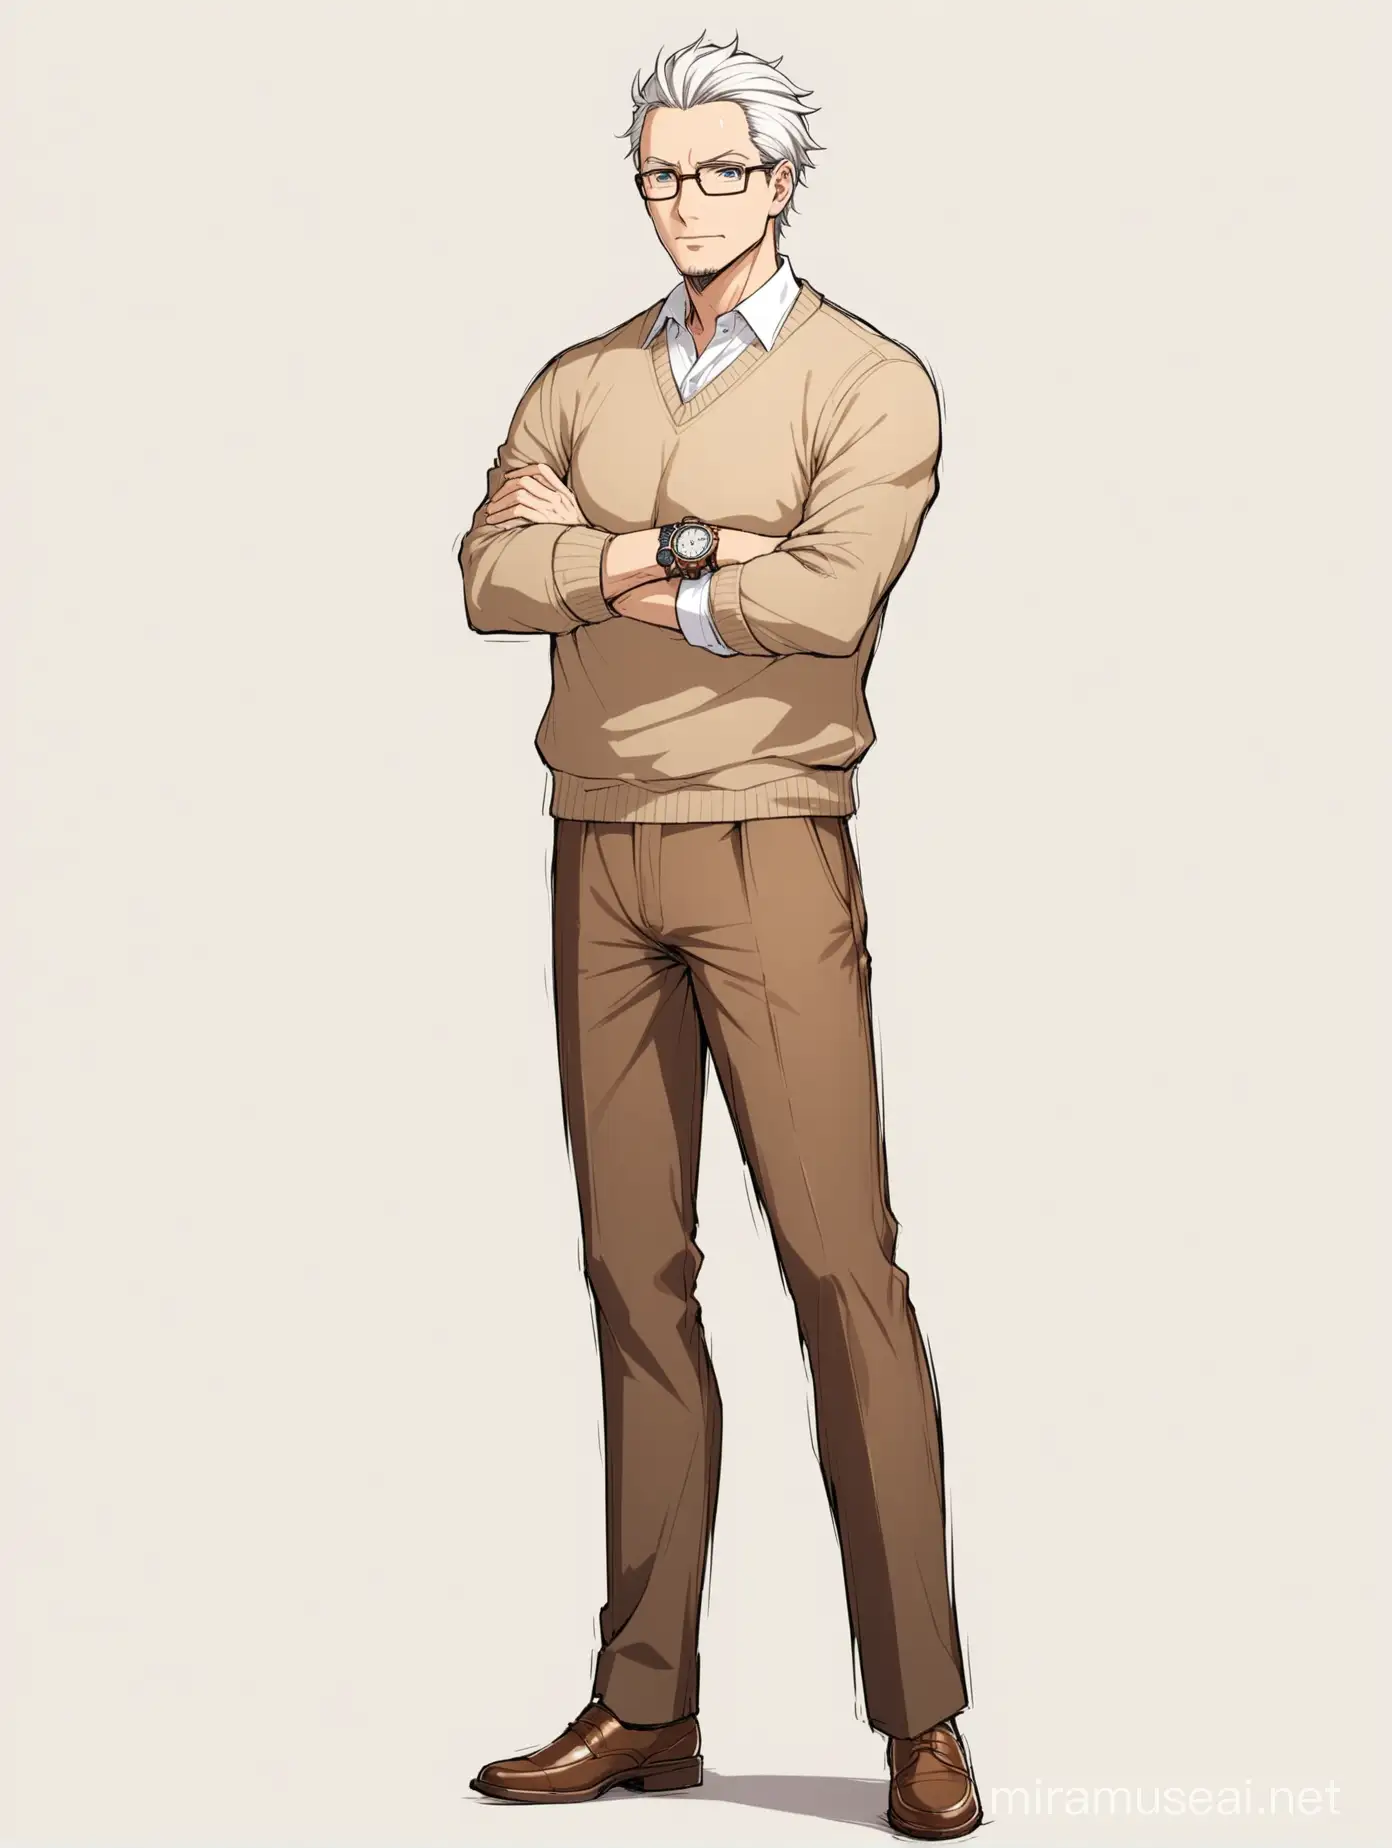 White background: full body A handsome anime man in his forties, with white hair combed back, wearing glasses, a white shirt with a brown sweater over it, brown pants, and brown shoes. He wears a watch, and his face shows intelligence. He crosses his arms.